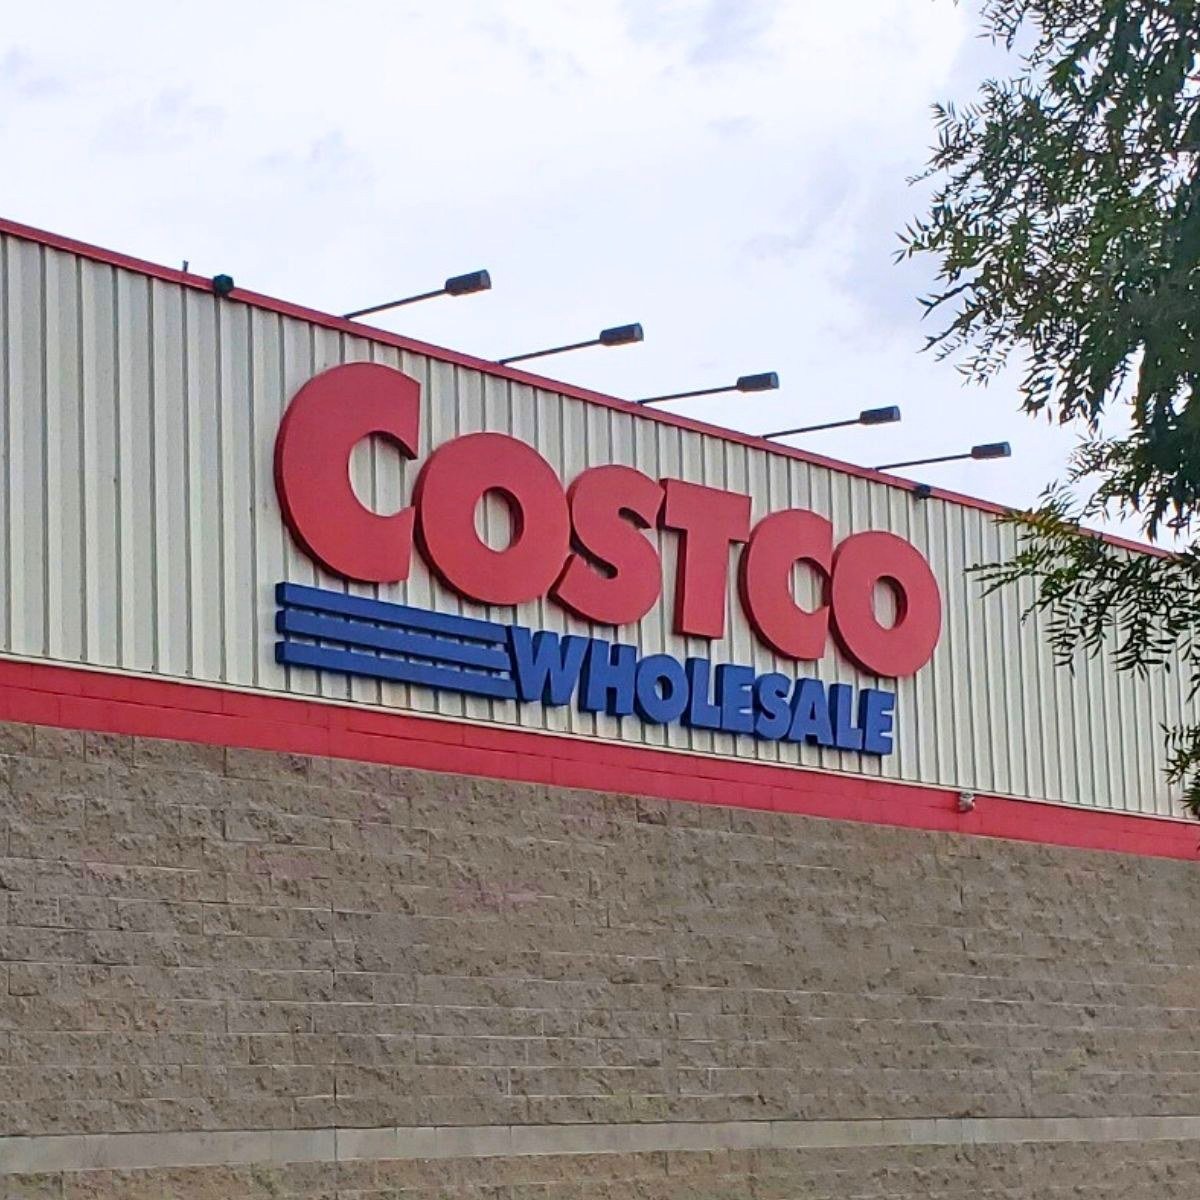 A picture of the costco sign on a store wall.